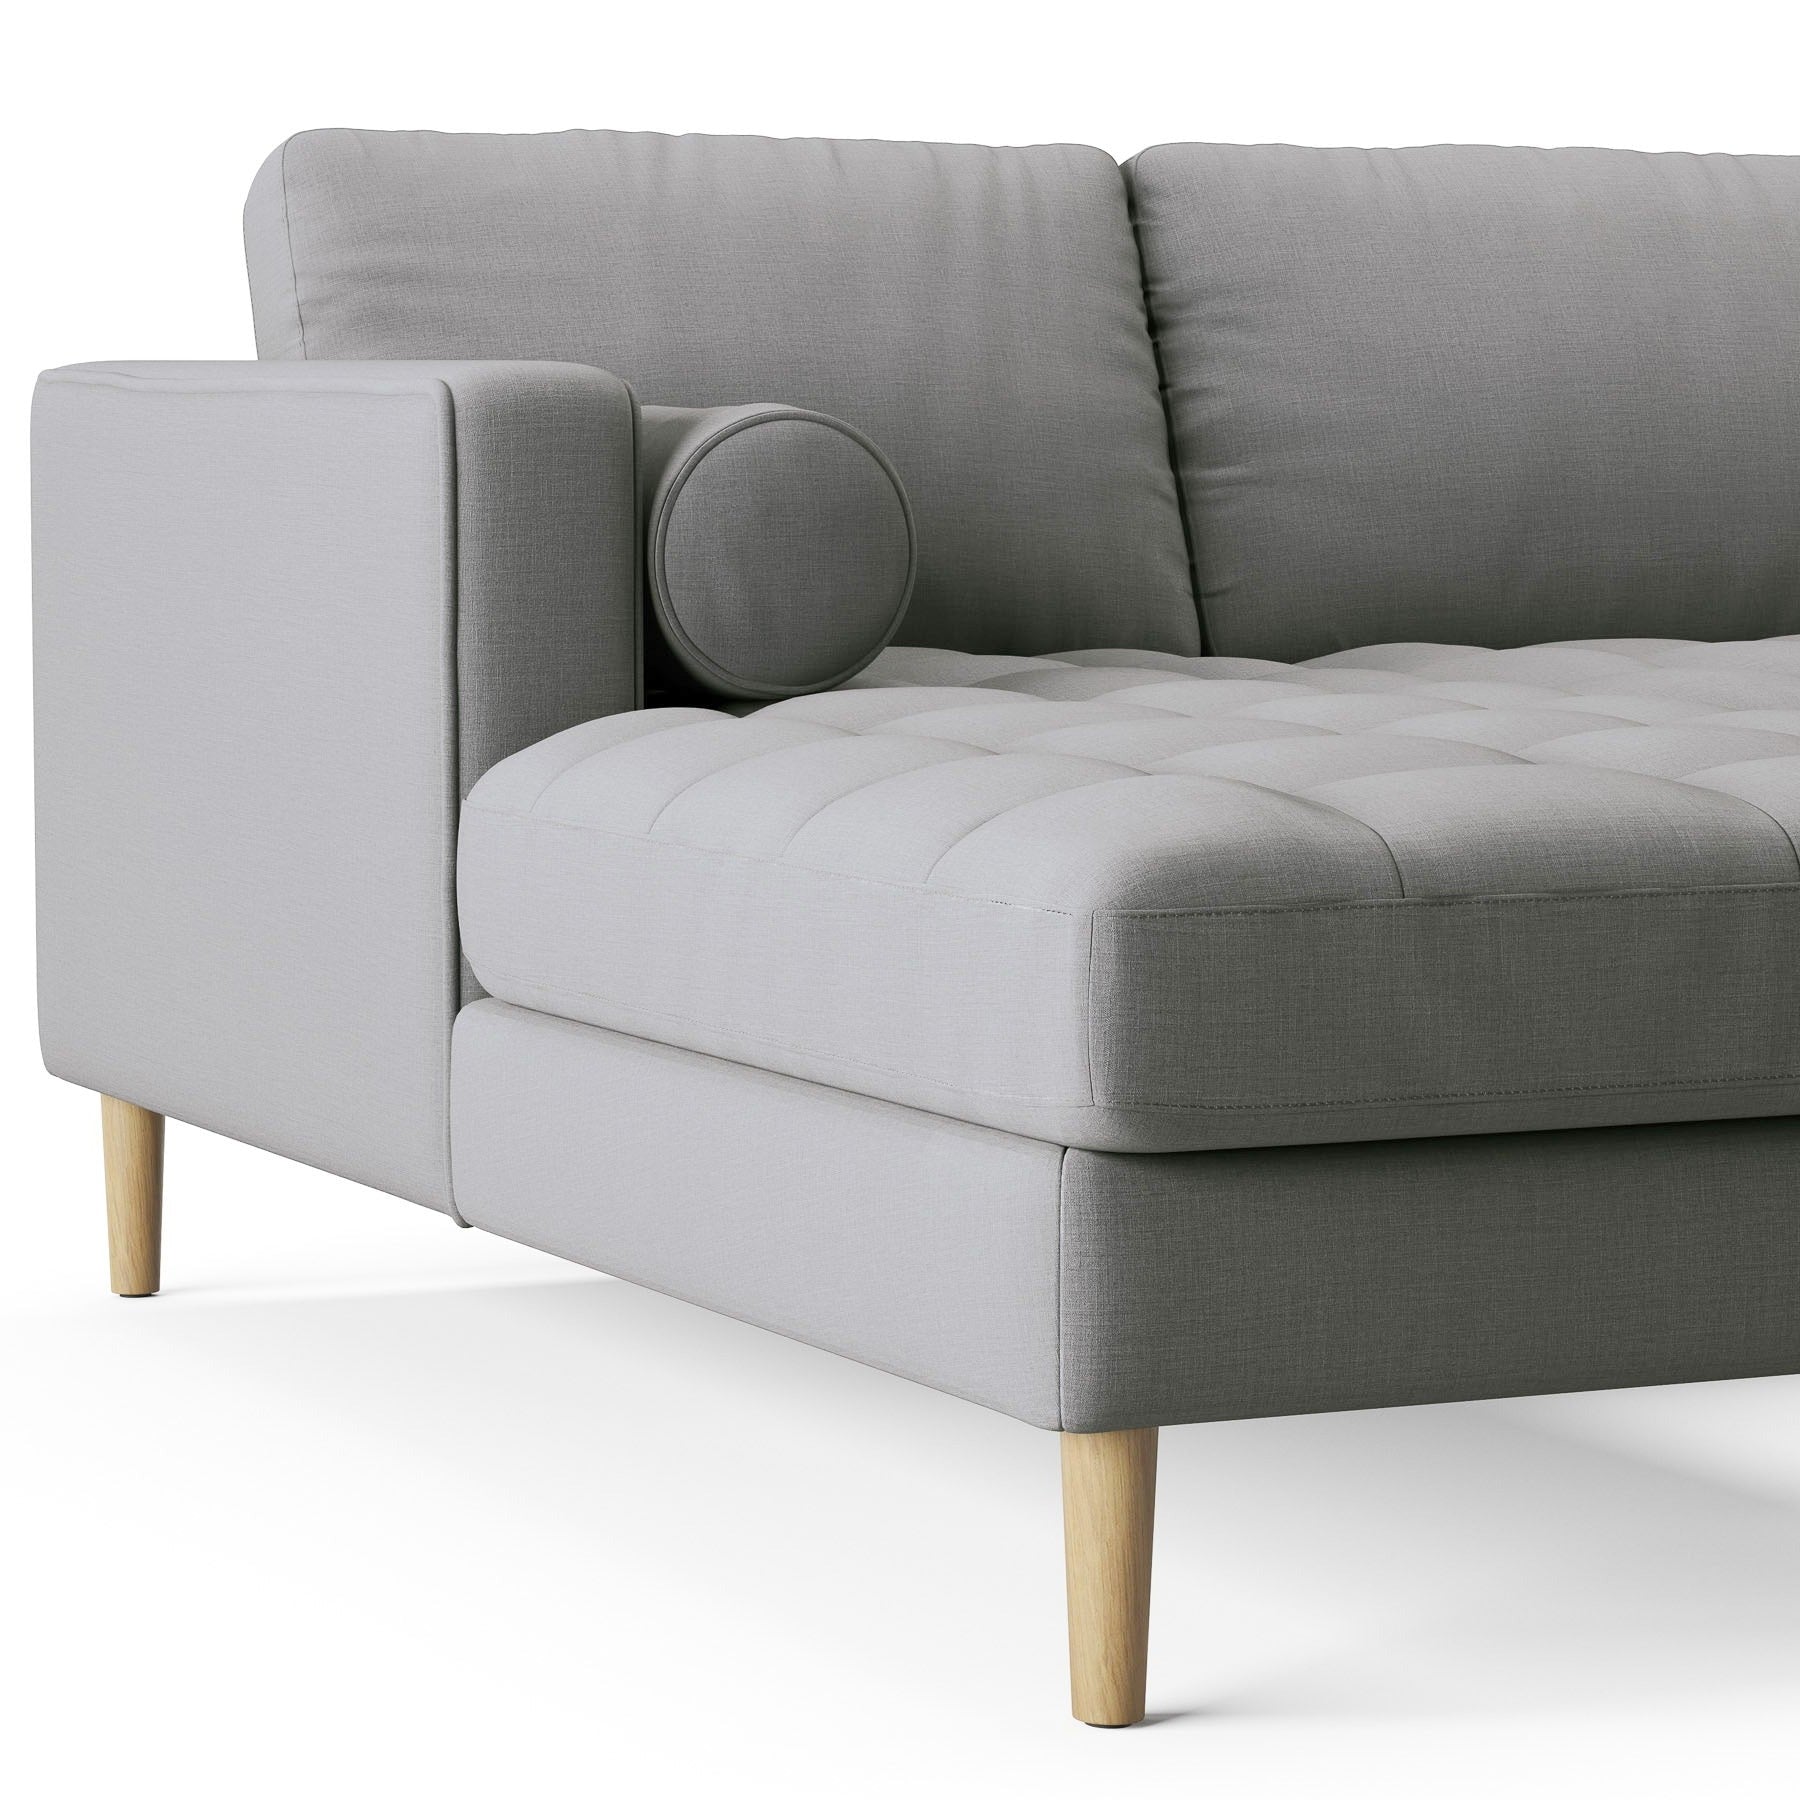 stone-grey right-sectional